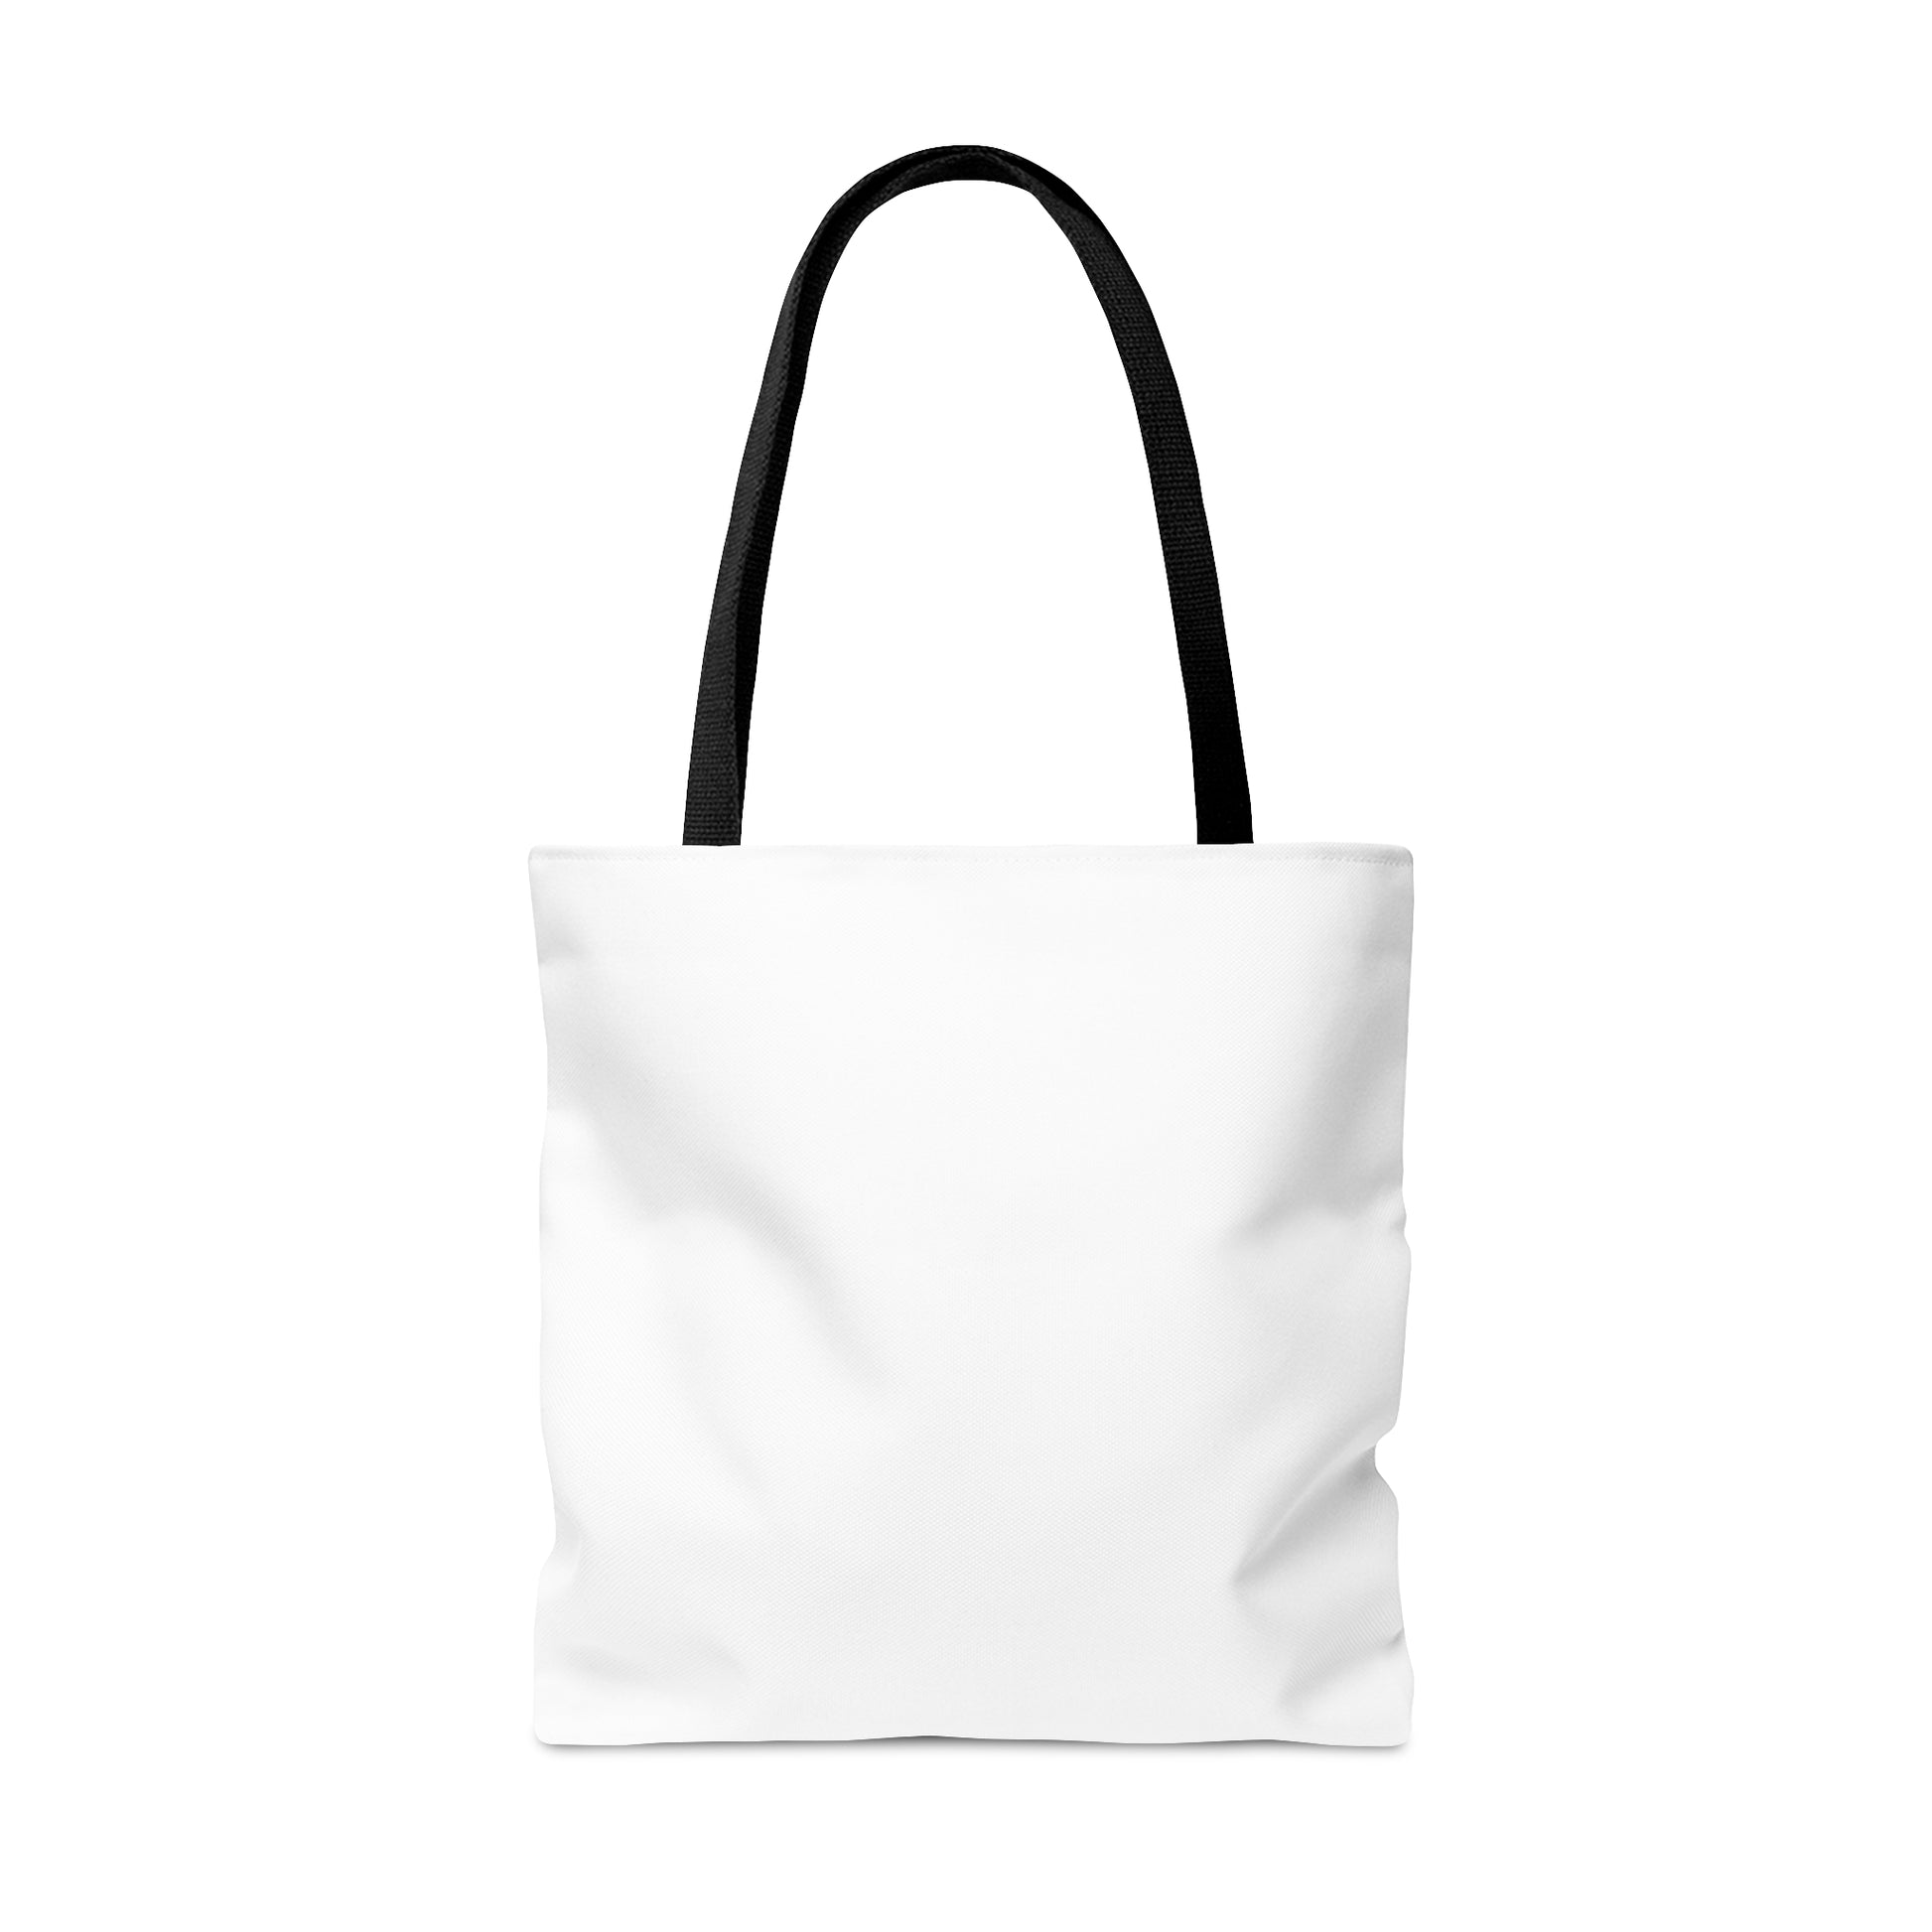 I Just Tested Positive For Faith In Jesus Christian Tote Bag Printify